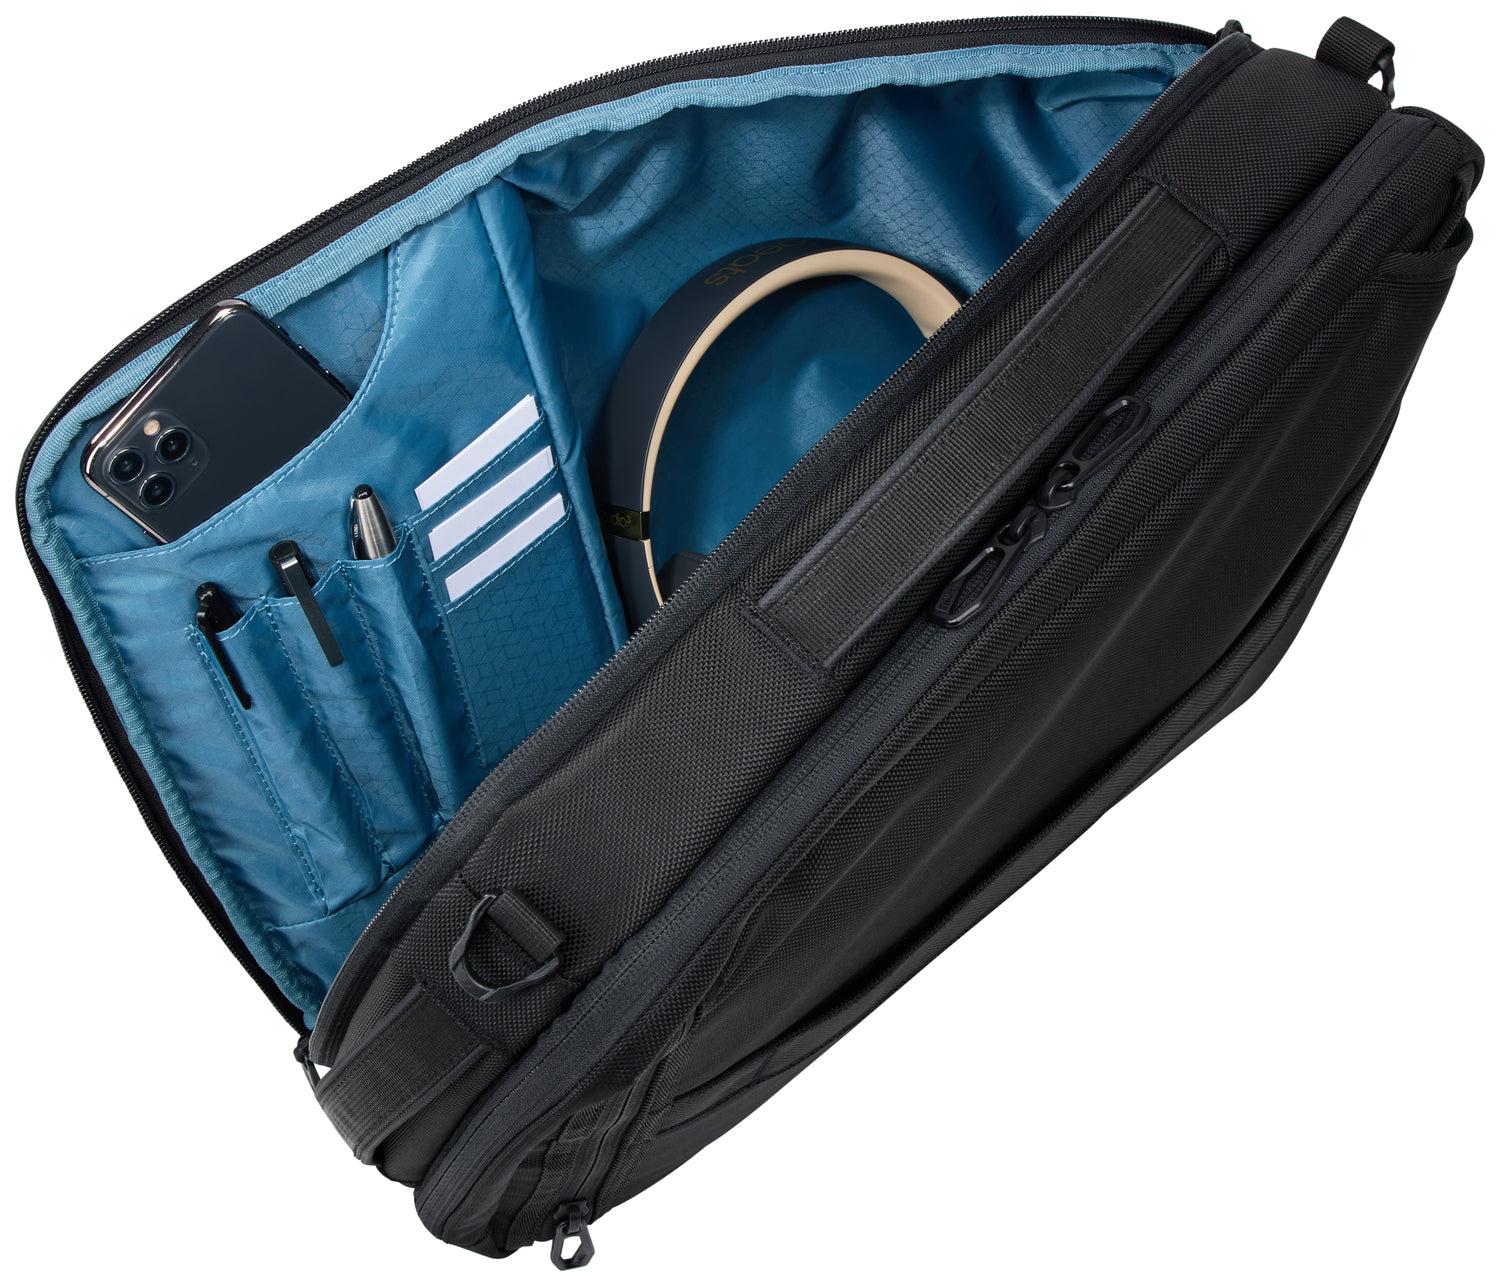 Thule Luggage Accent Convertible Laptop Bag 15.6" – Luggage Pros